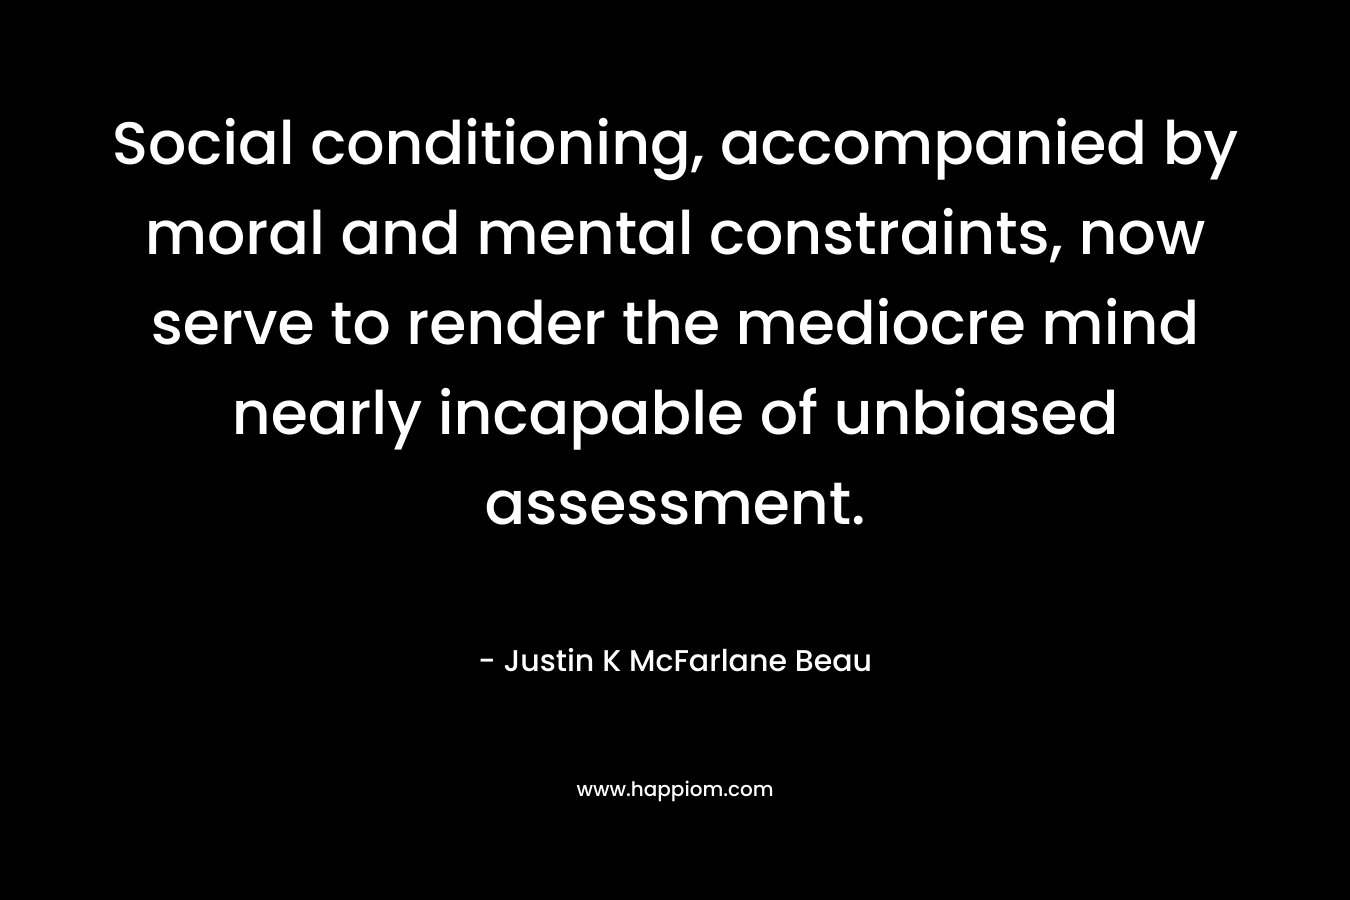 Social conditioning, accompanied by moral and mental constraints, now serve to render the mediocre mind nearly incapable of unbiased assessment.